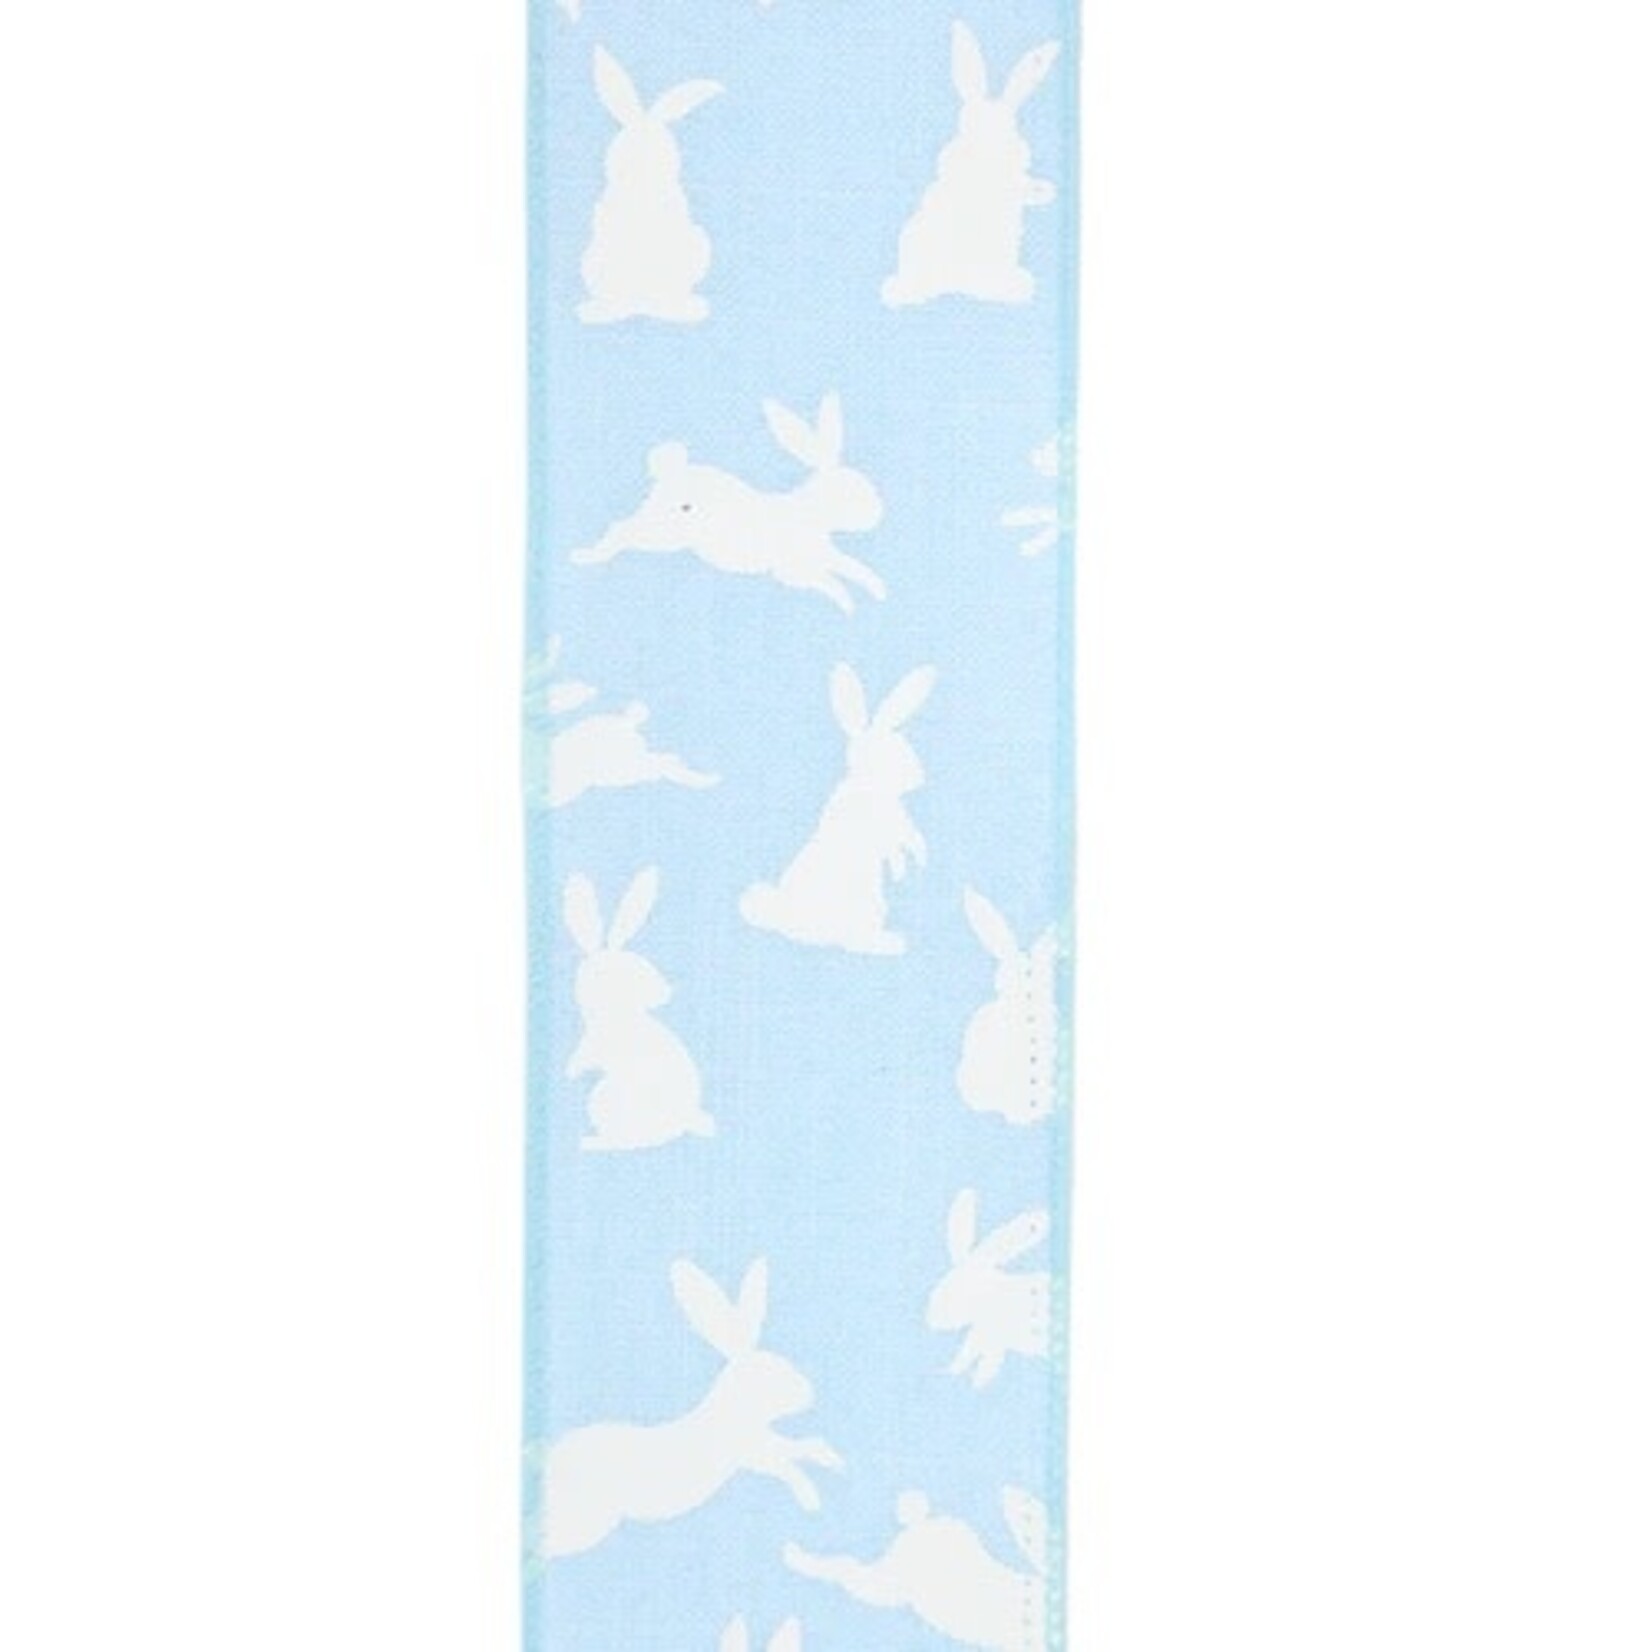 LA Ribbons and Crafts 2 1/2" Wired Ribbon , Blue w/ White All Over Bunny - 10 Yard Roll